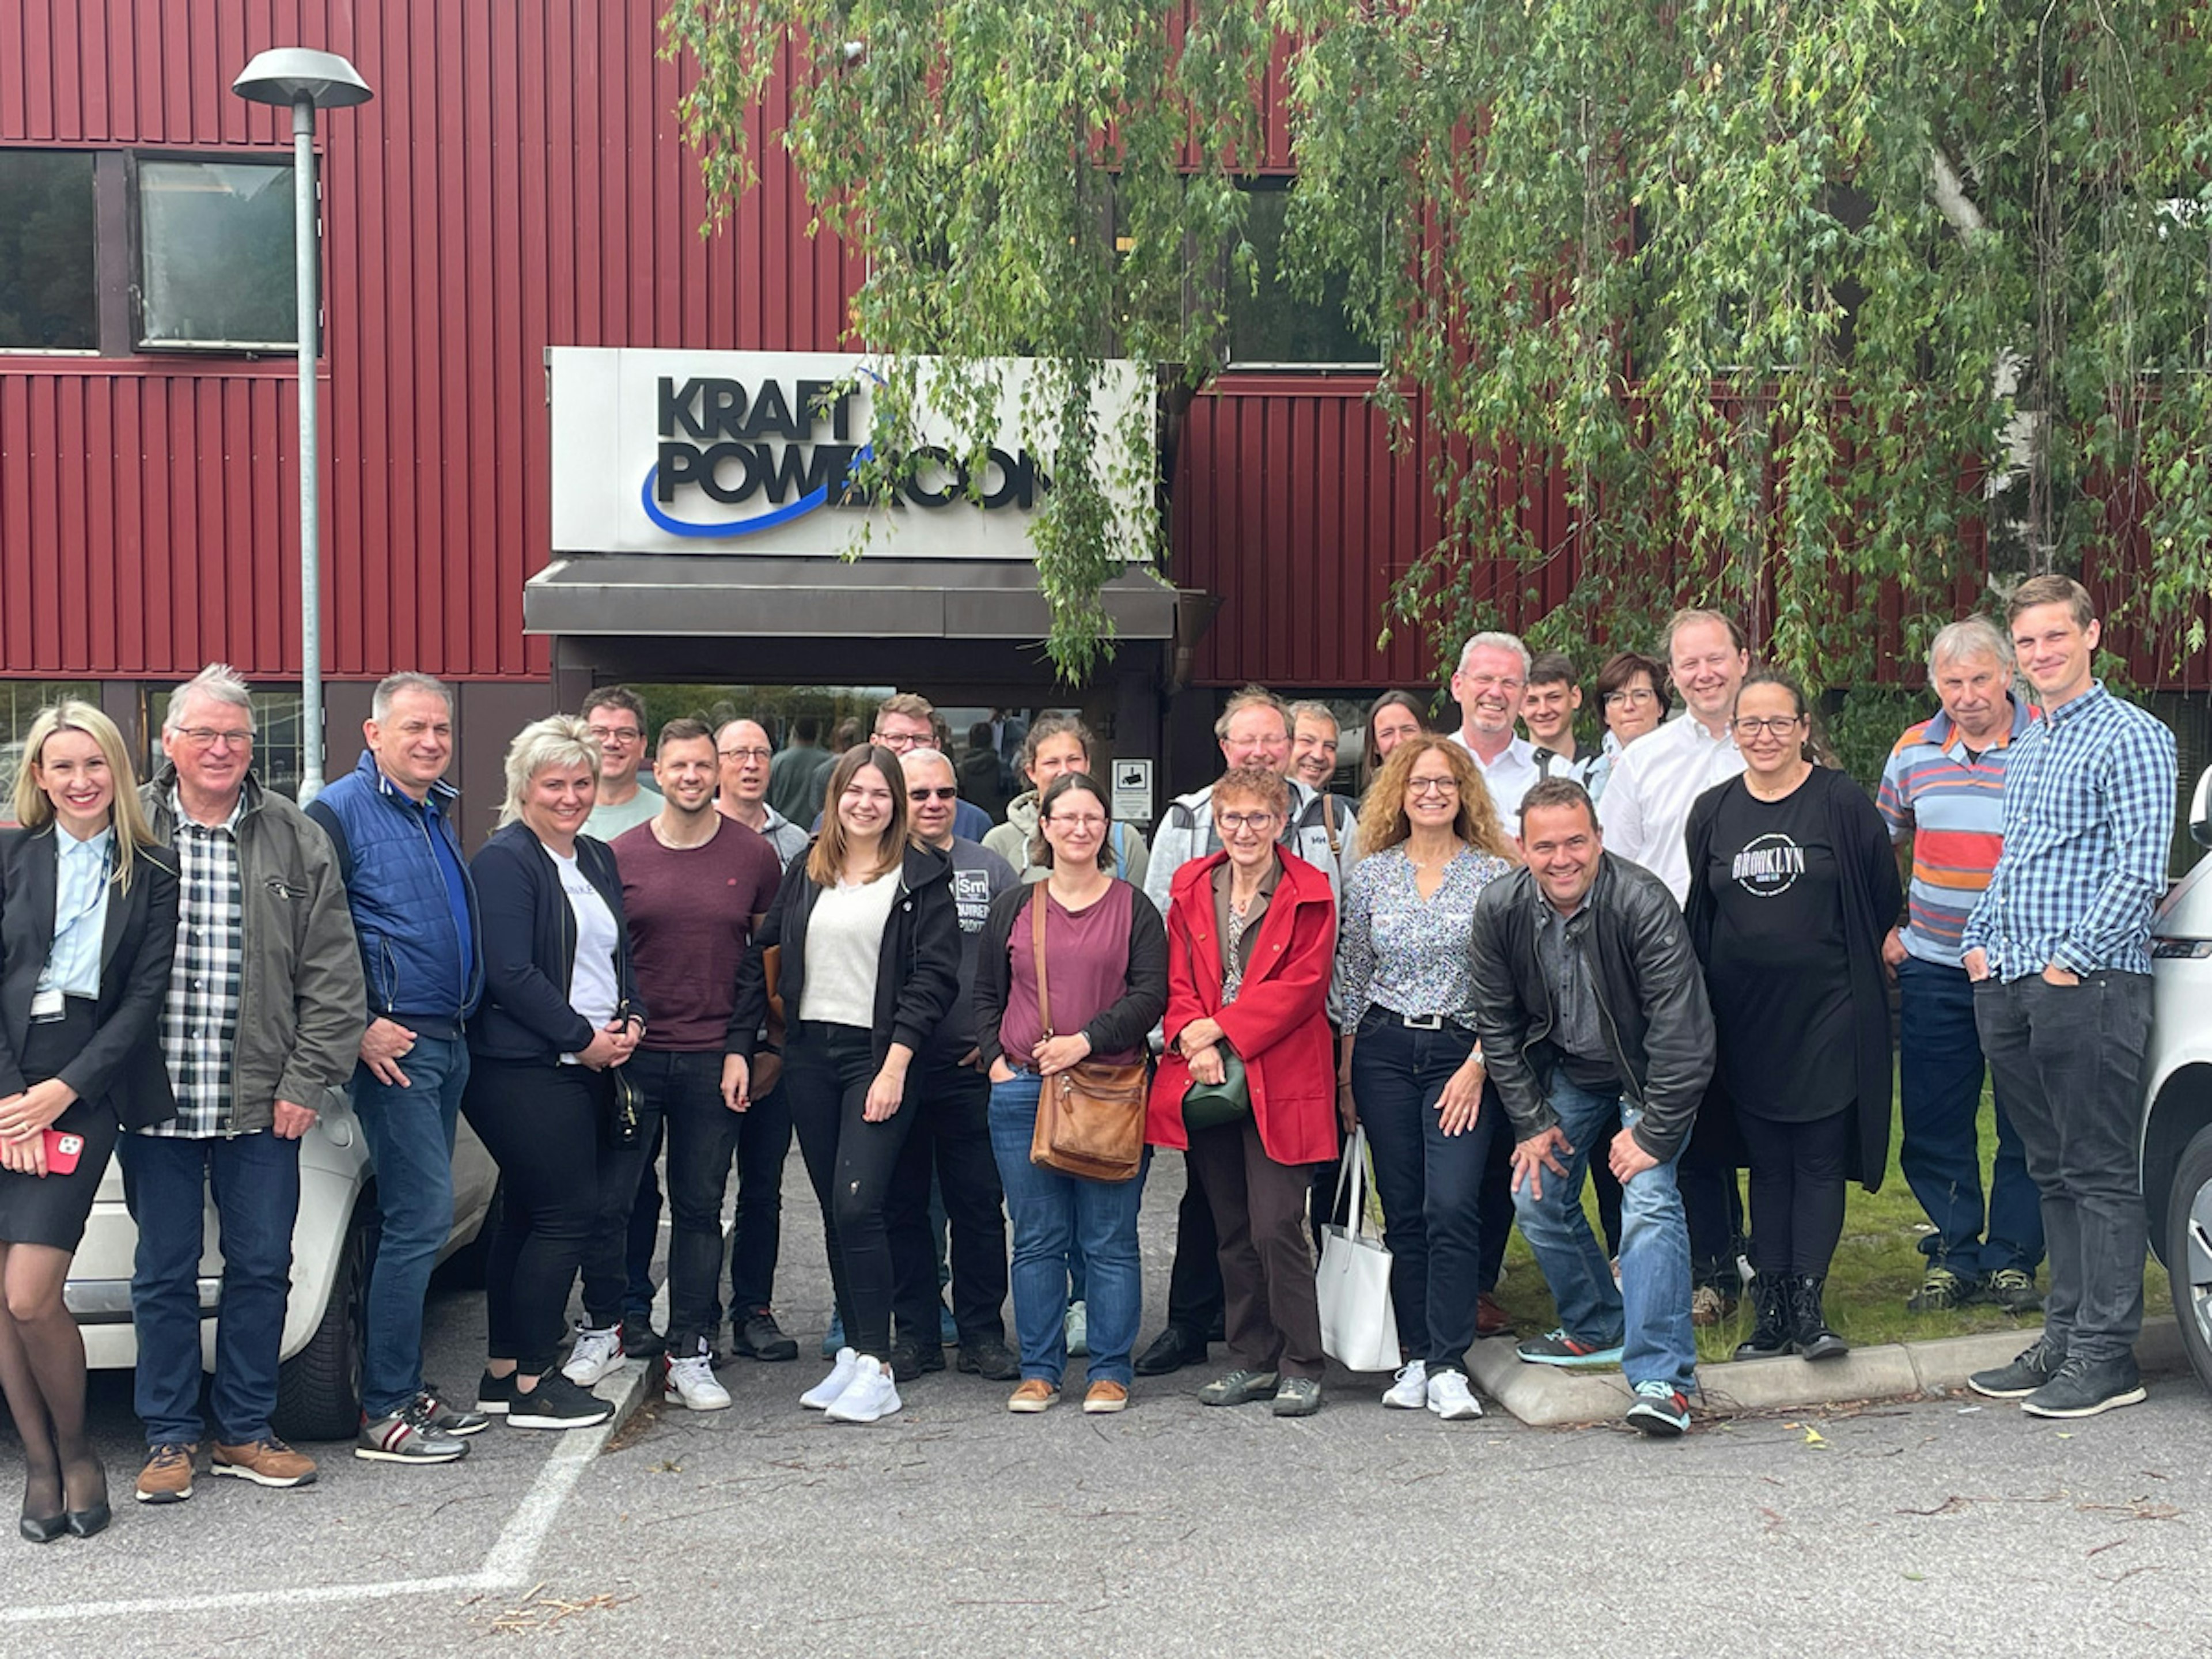 delegation of 25 German platers, who we welcomed to the KraftPowercon